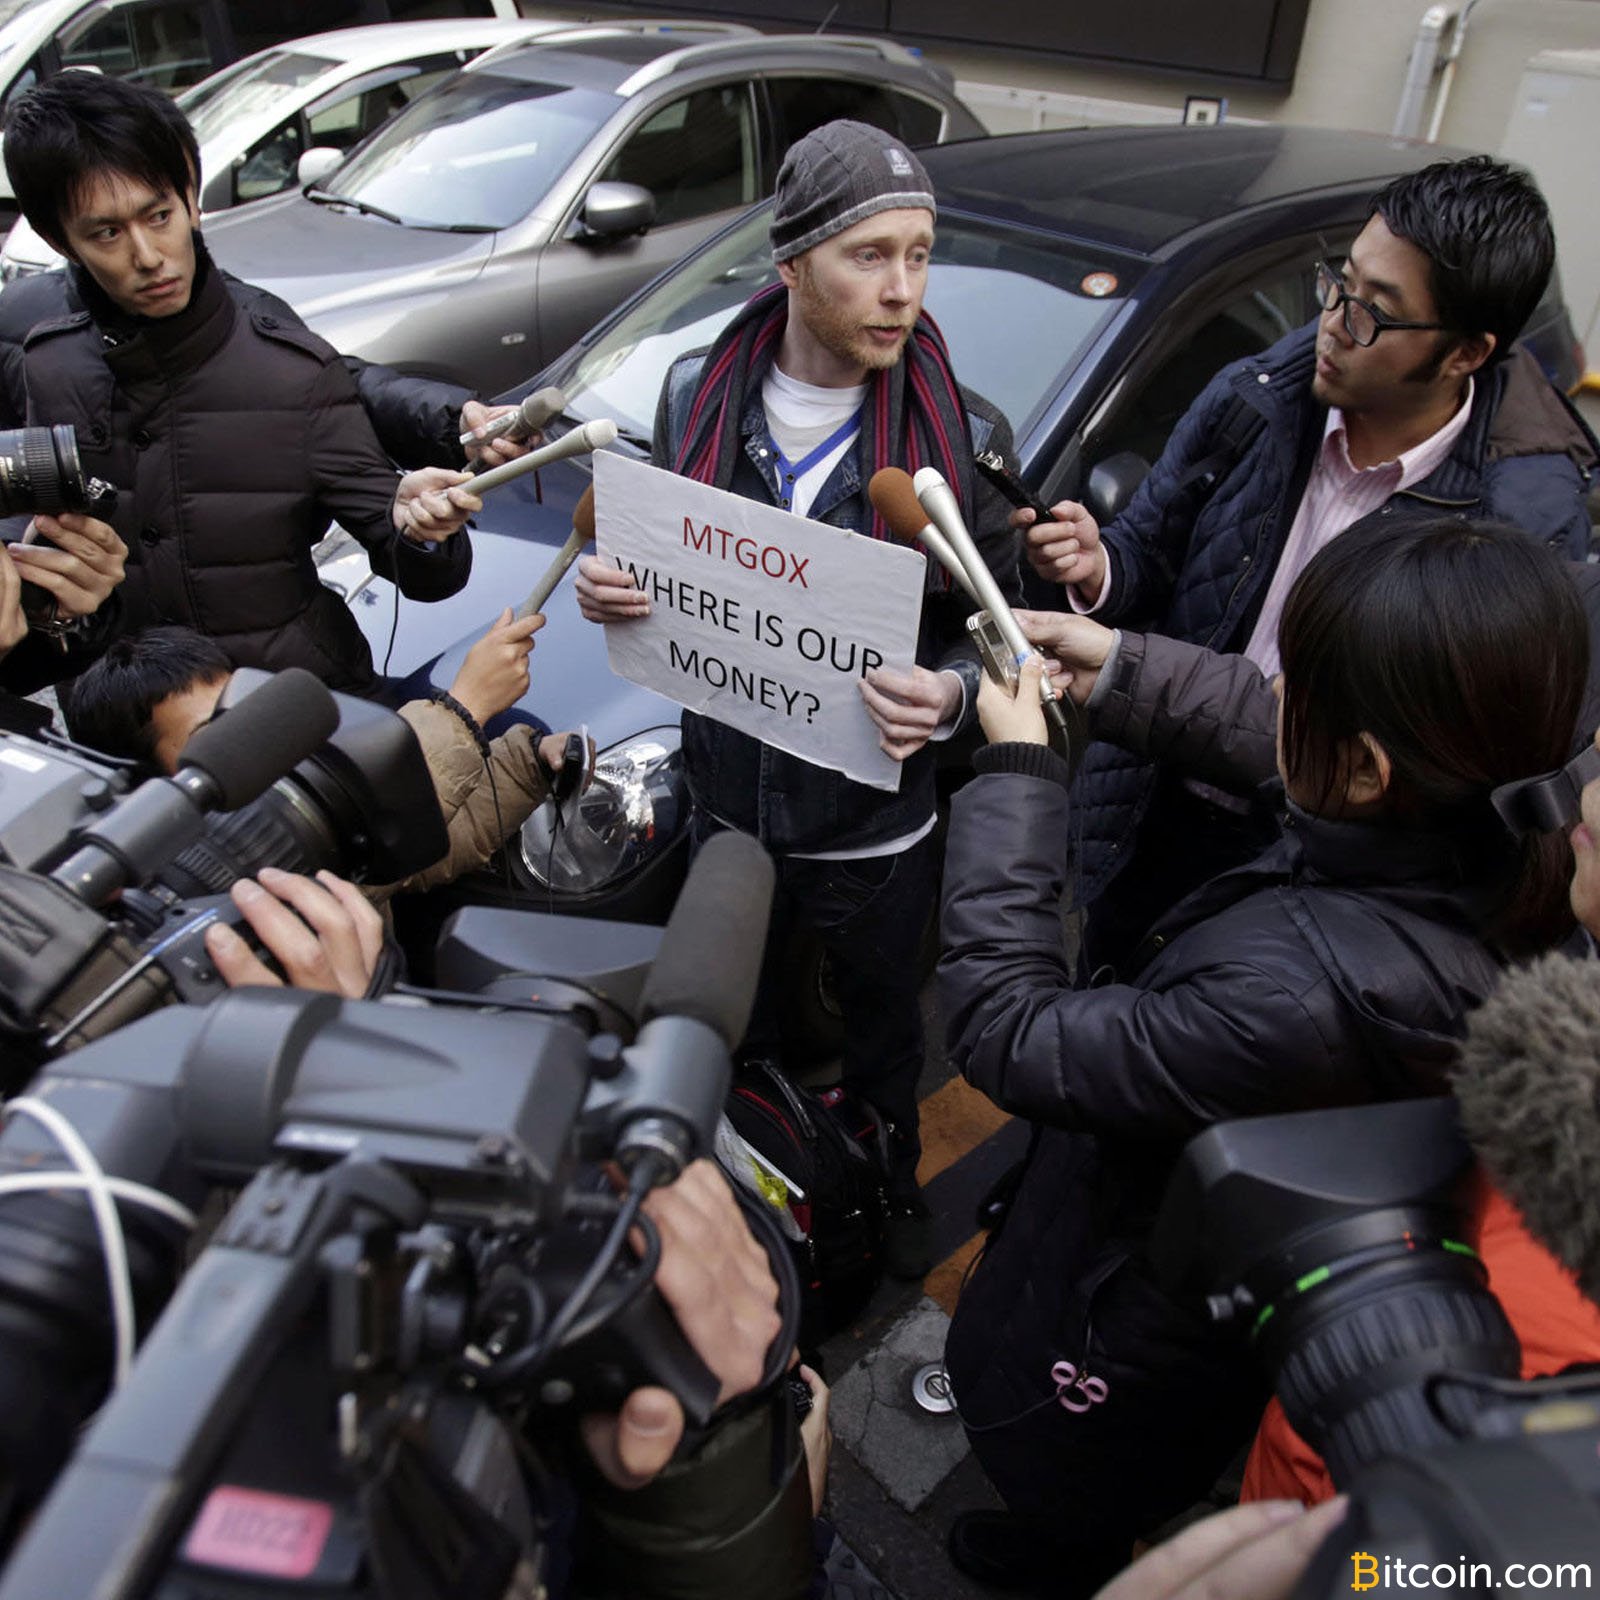 Mt Gox Bankruptcy Claimants Are Not Happy With Possible Distribution Outcome